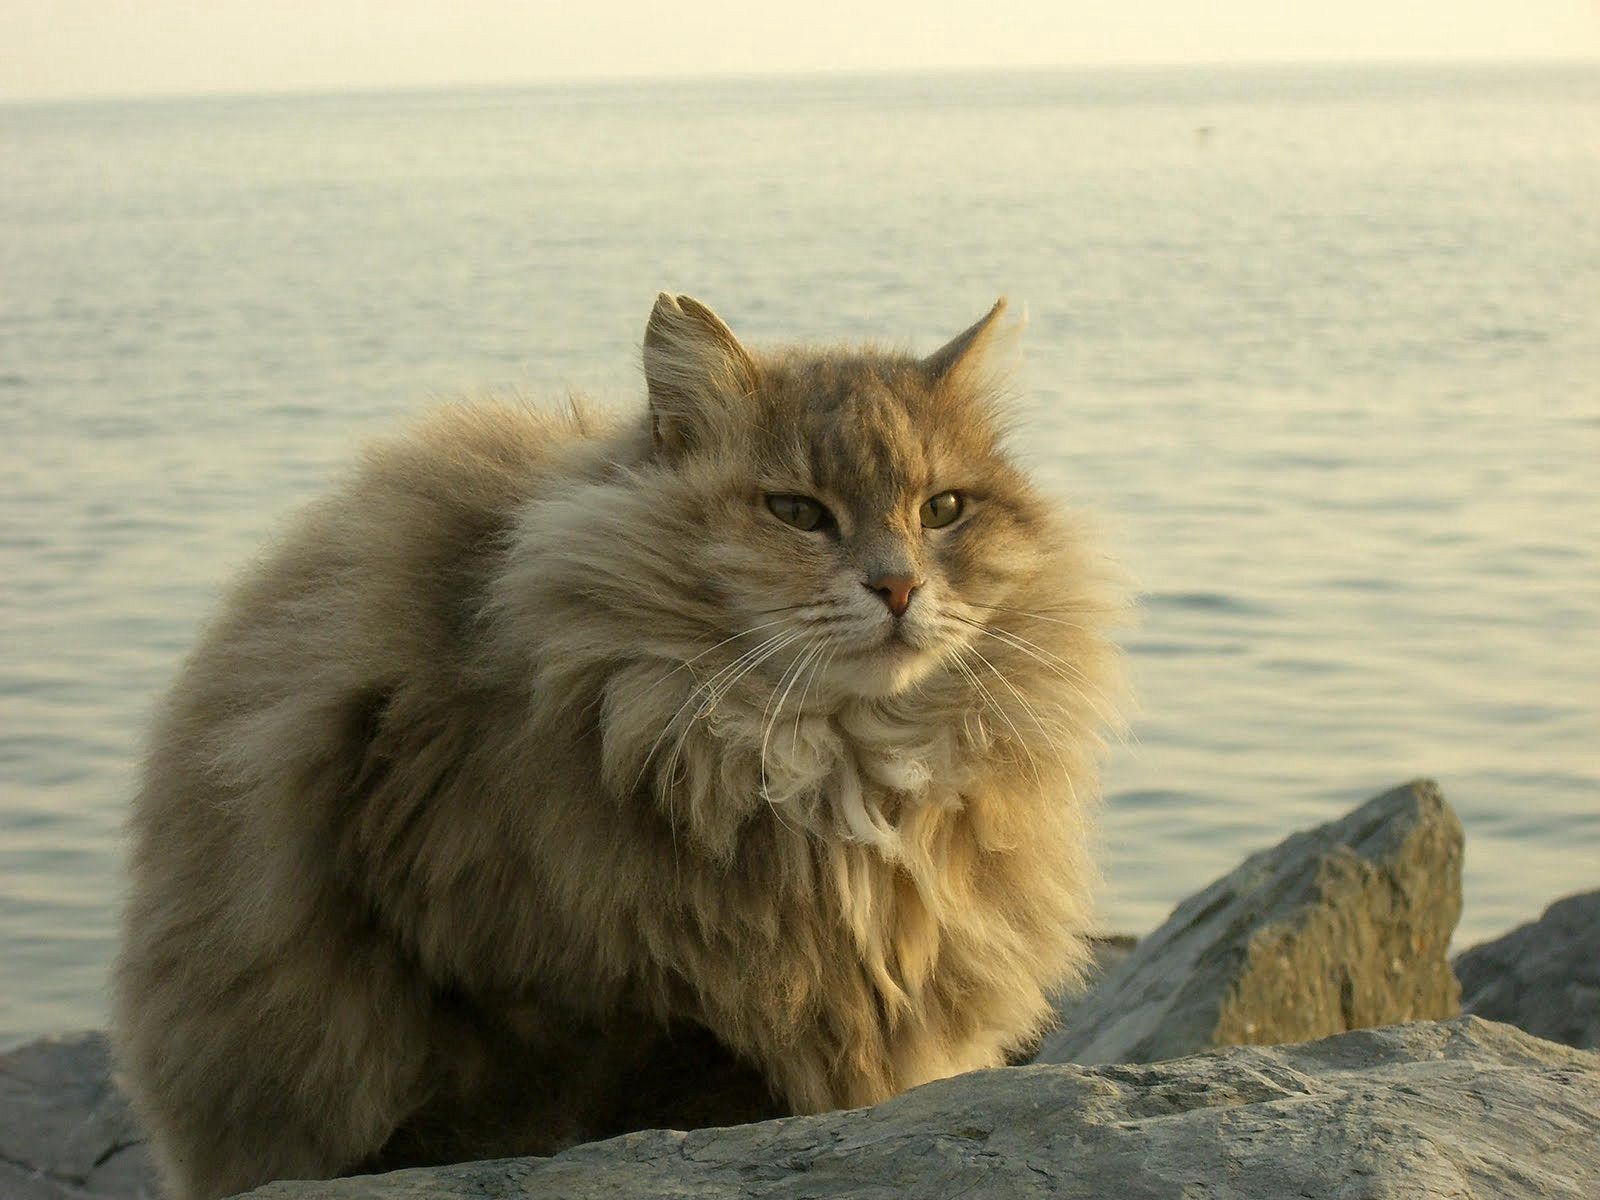 124186 download wallpaper cat, animals, rivers, stones, sit, fluffy, fat, thick screensavers and pictures for free